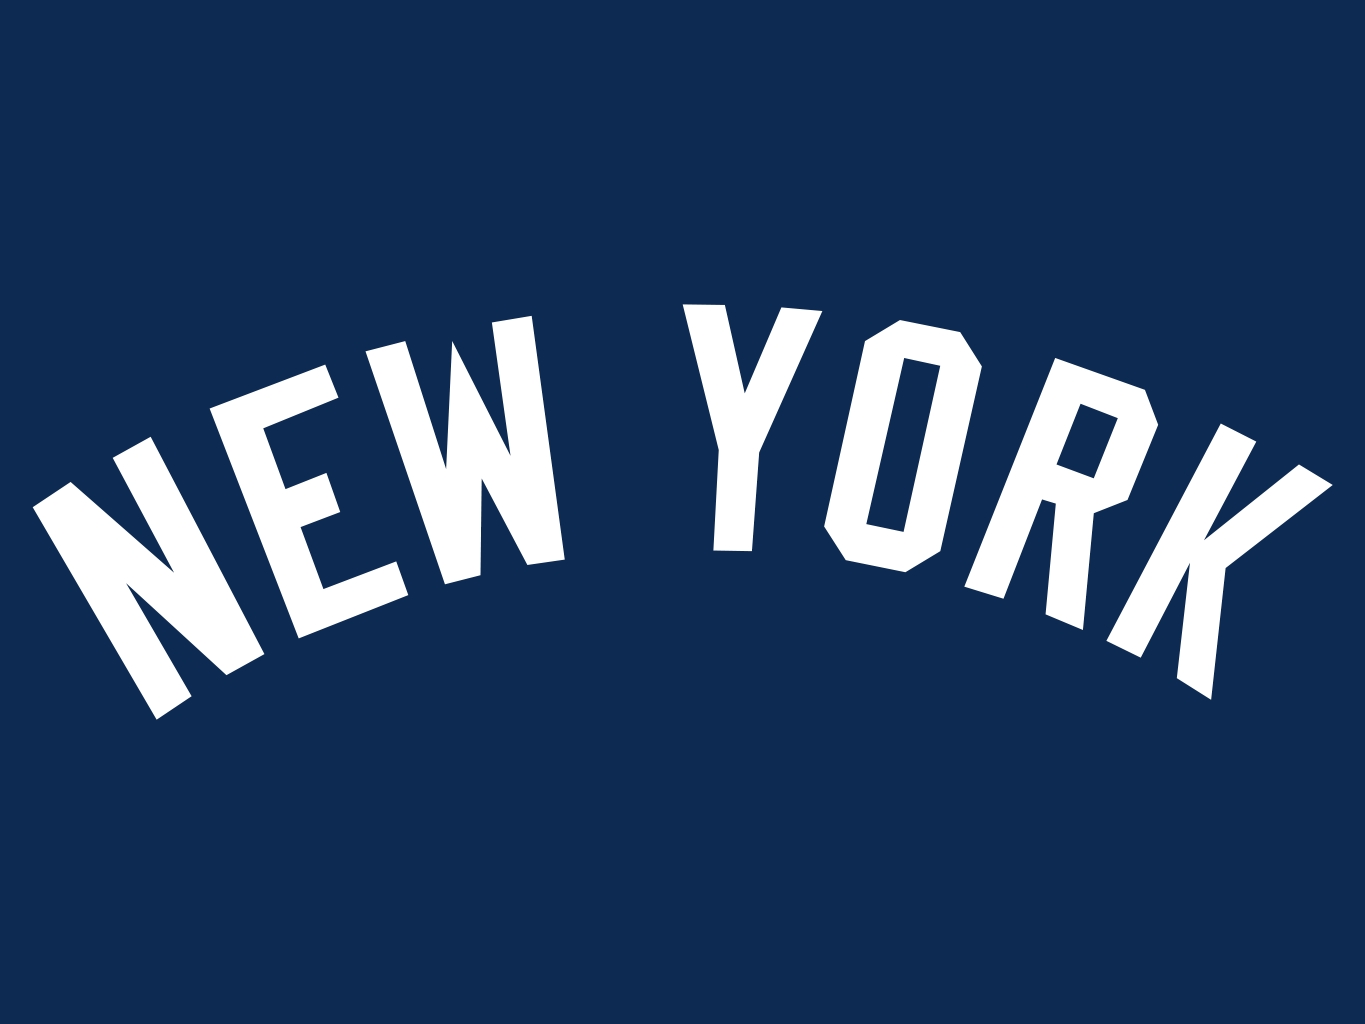 If You Are Looking For New York Yankees Image Today Is Your Lucky